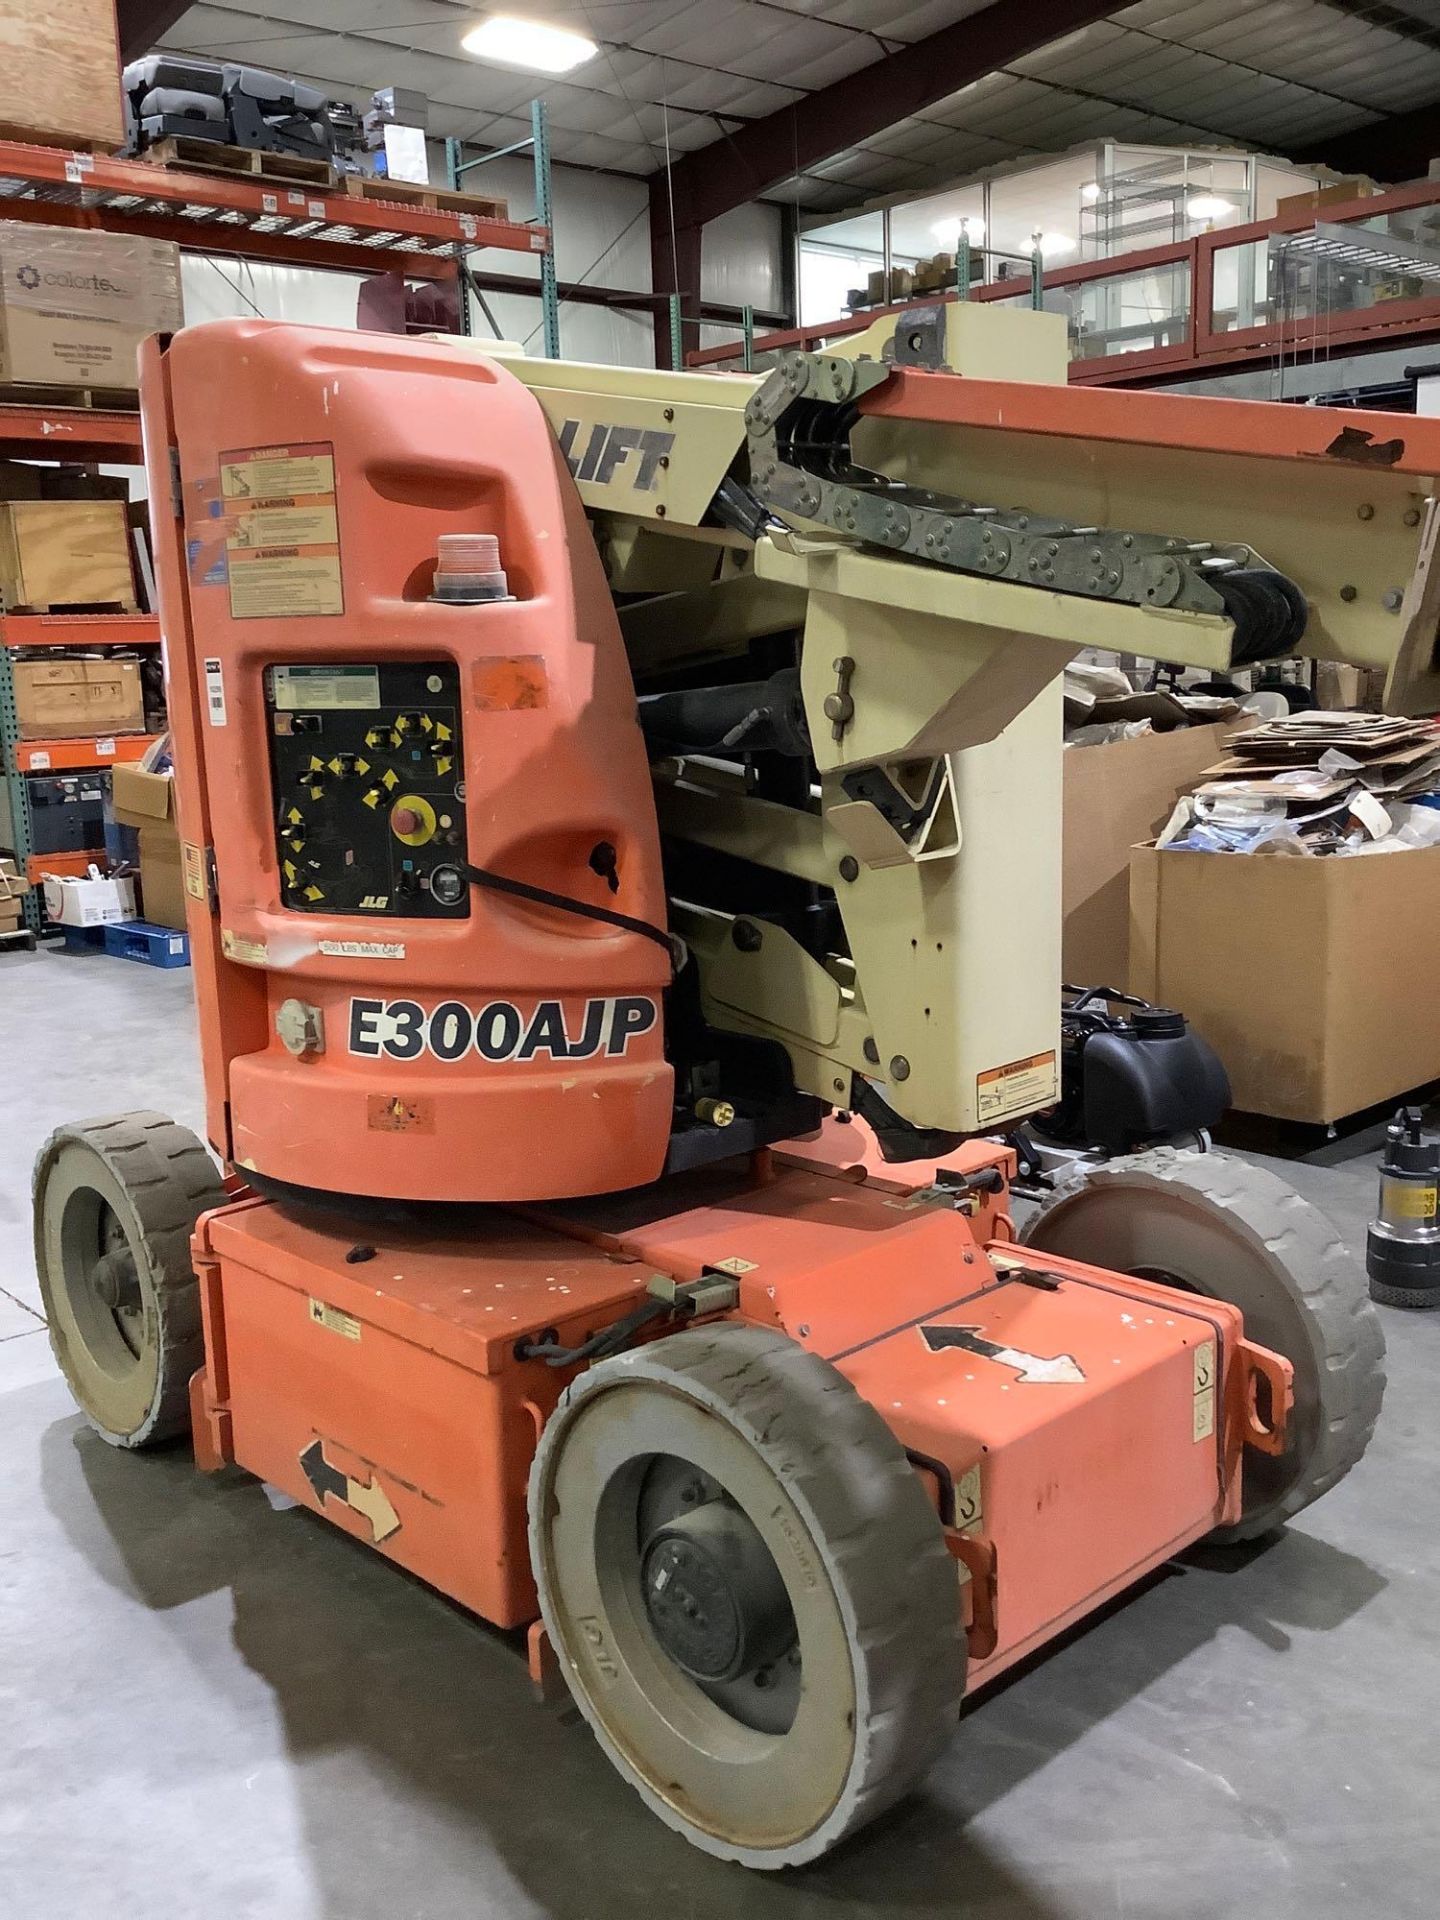 2008 JLG BOOM LIFT MODEL E300AJP, ELECTRIC, APPROX MAX PLATFORM HEIGHT 30FT - Image 10 of 17